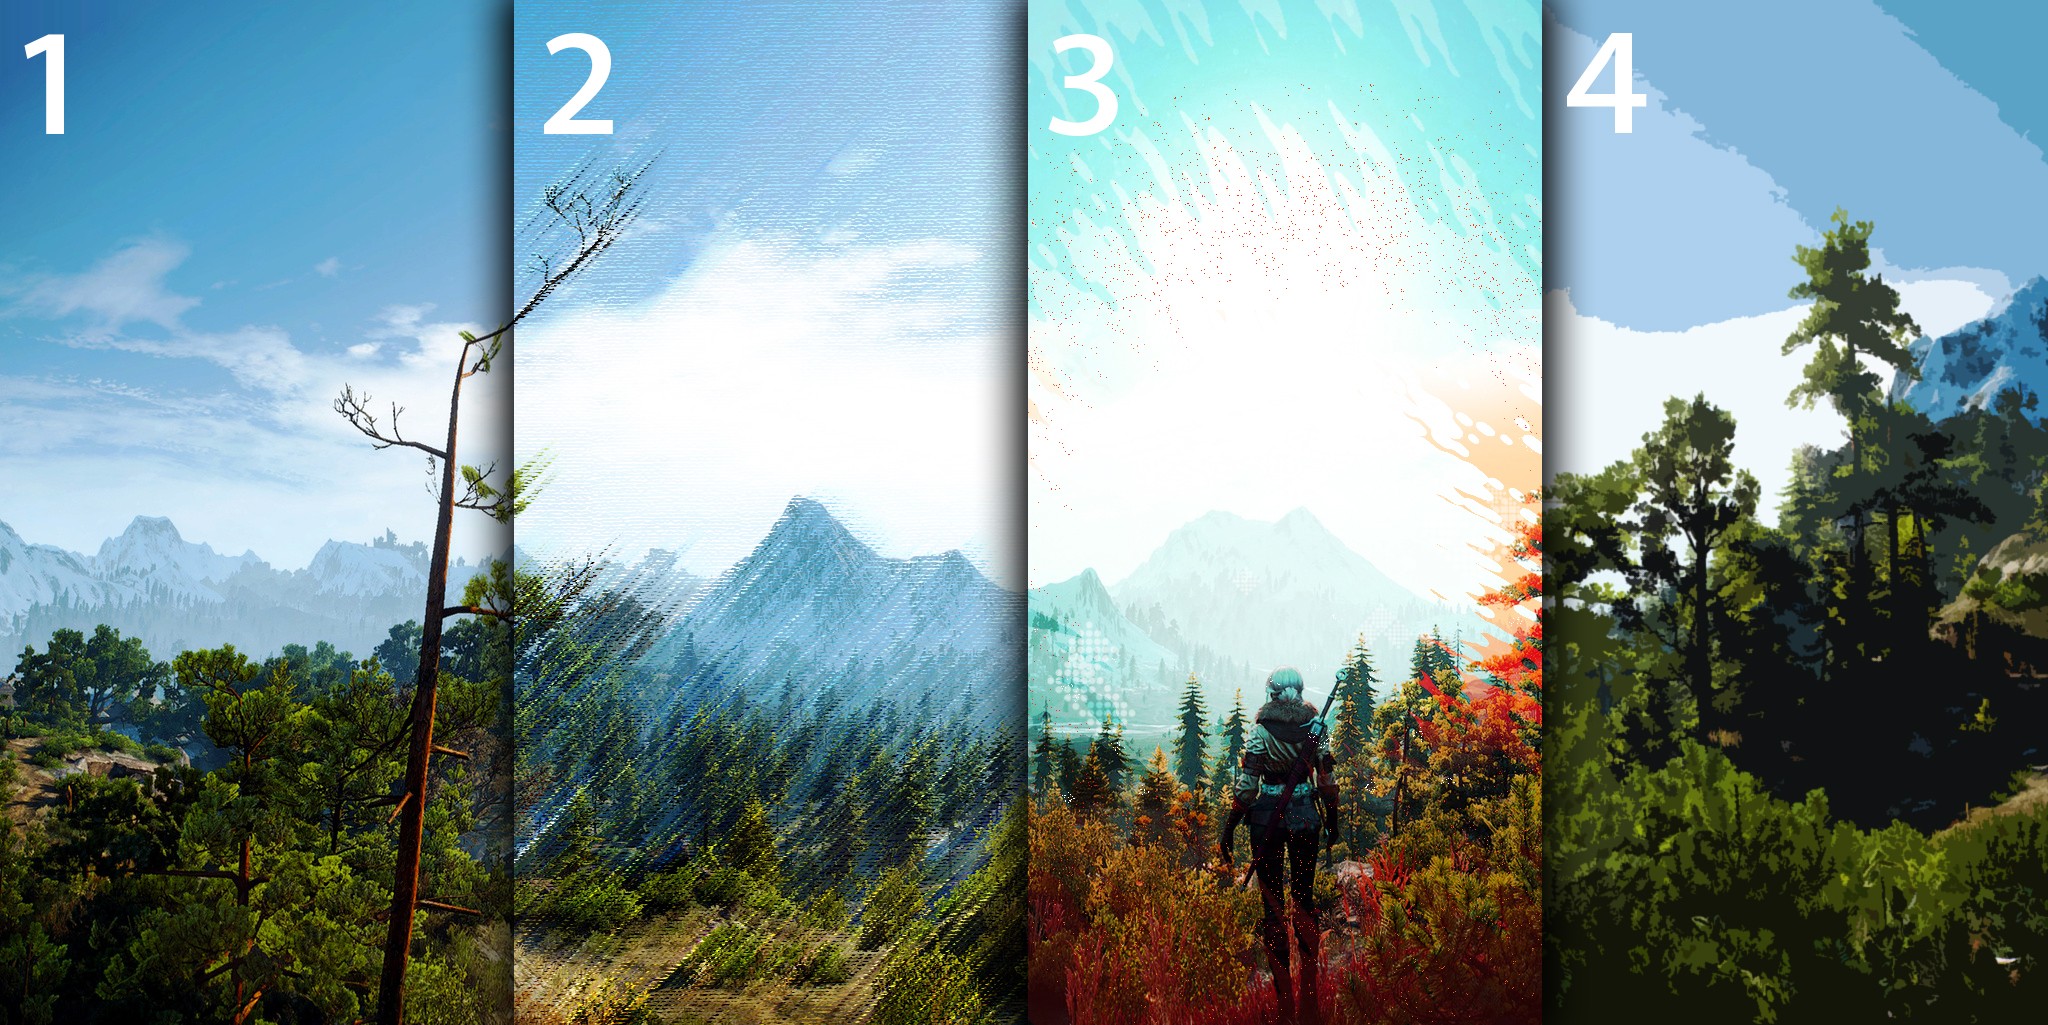 General 2048x1025 screen shot The Witcher 3: Wild Hunt Cirilla Fiona Elen Riannon video game landscape RPG numbers video games PC gaming collage